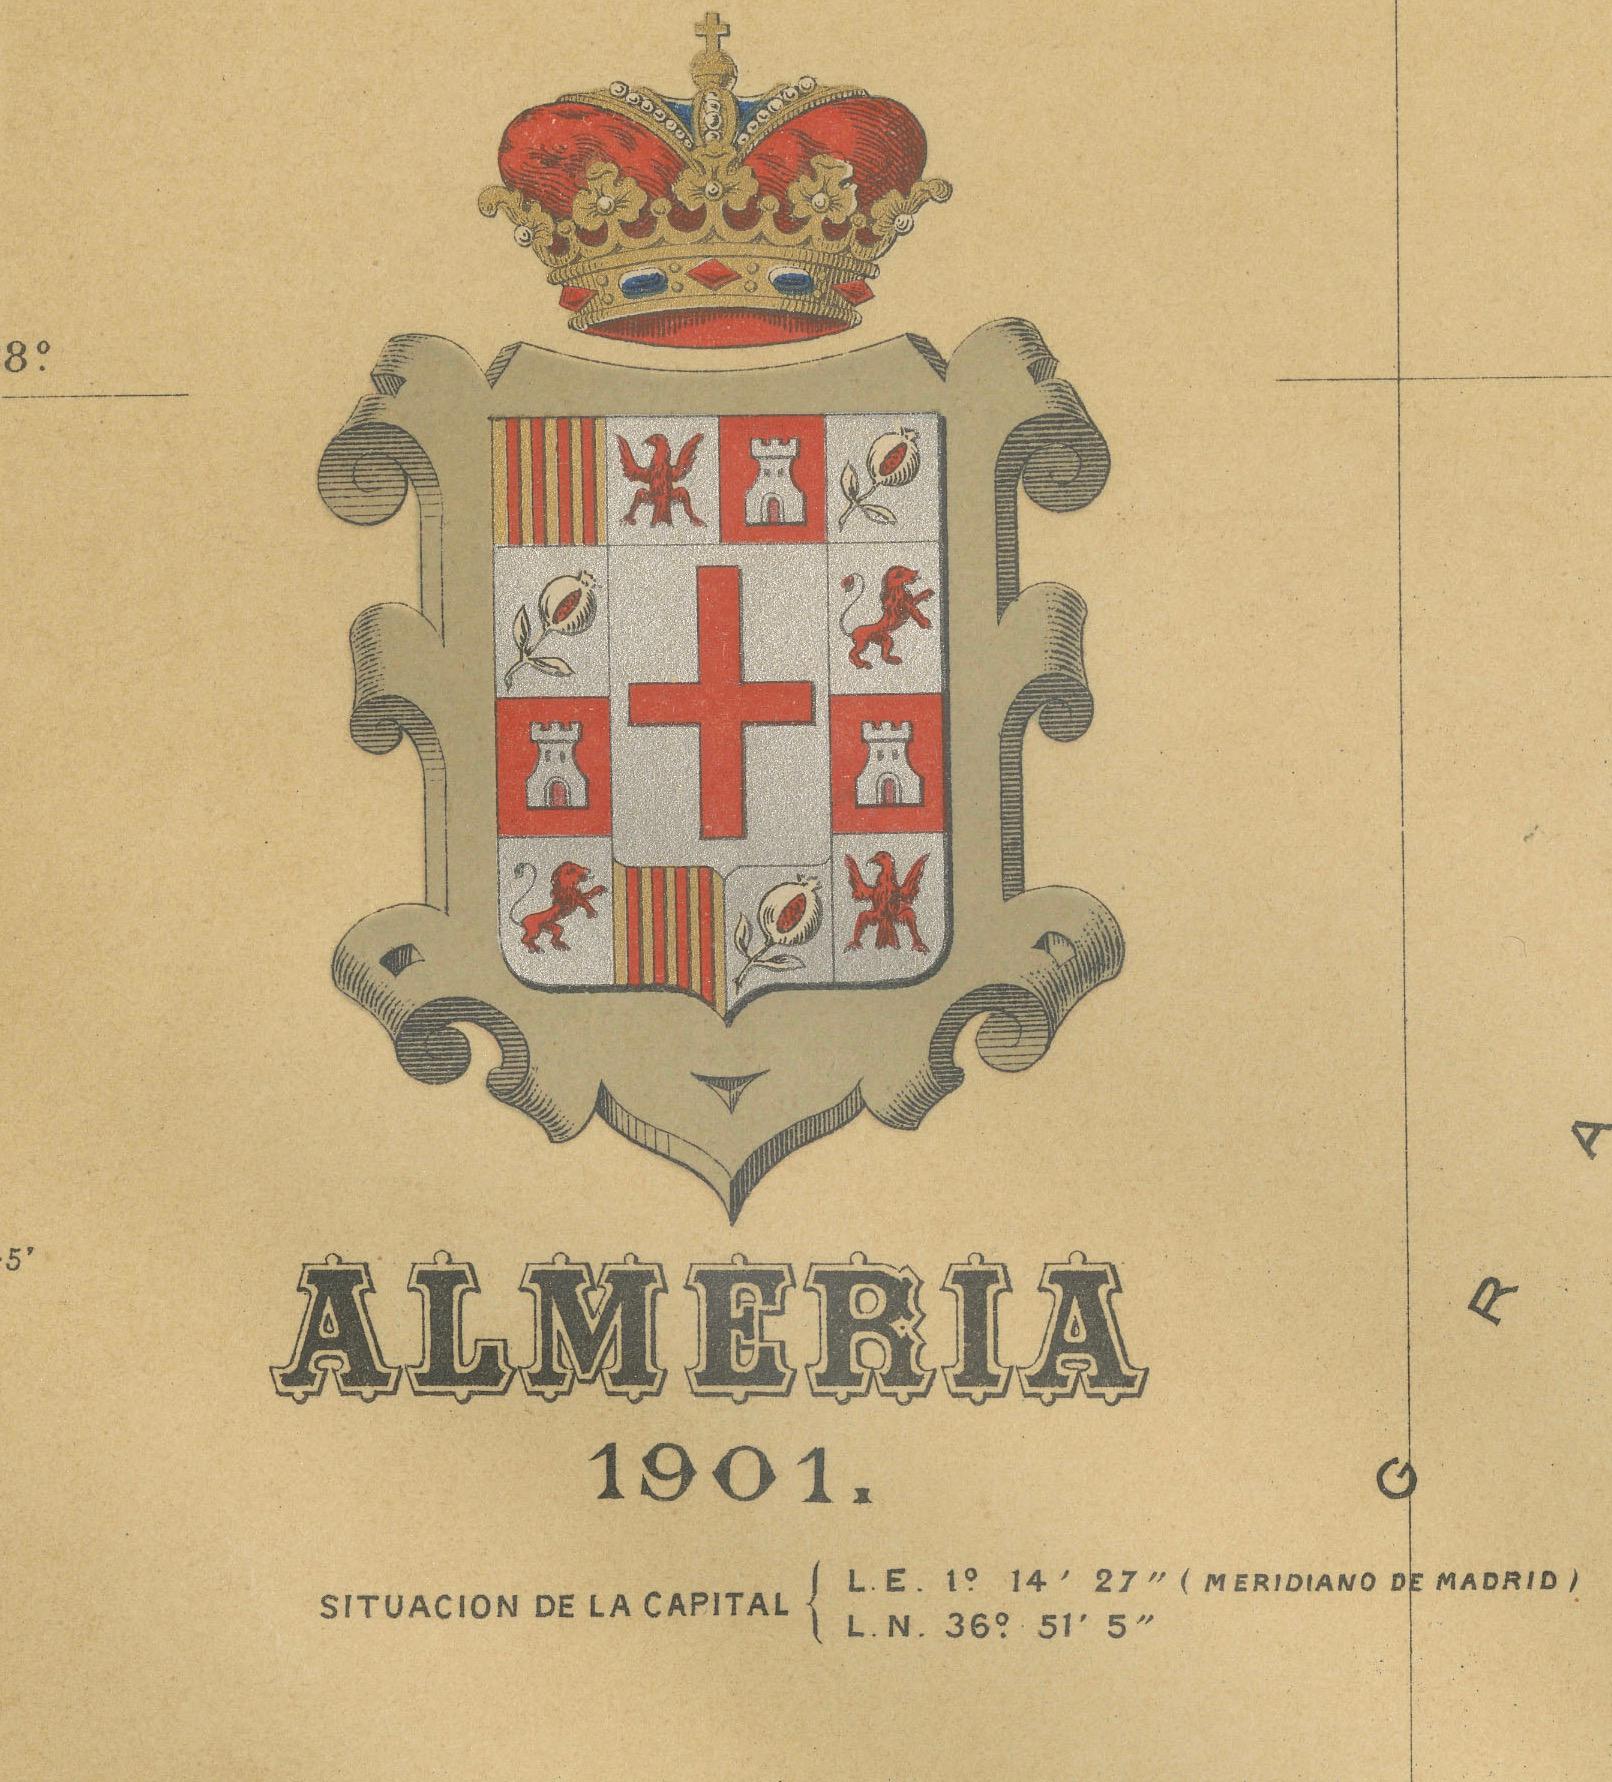 An original antique map of the province of Almería, Spain, from the year 1901. 

The Mediterranean Sea, labeled as 